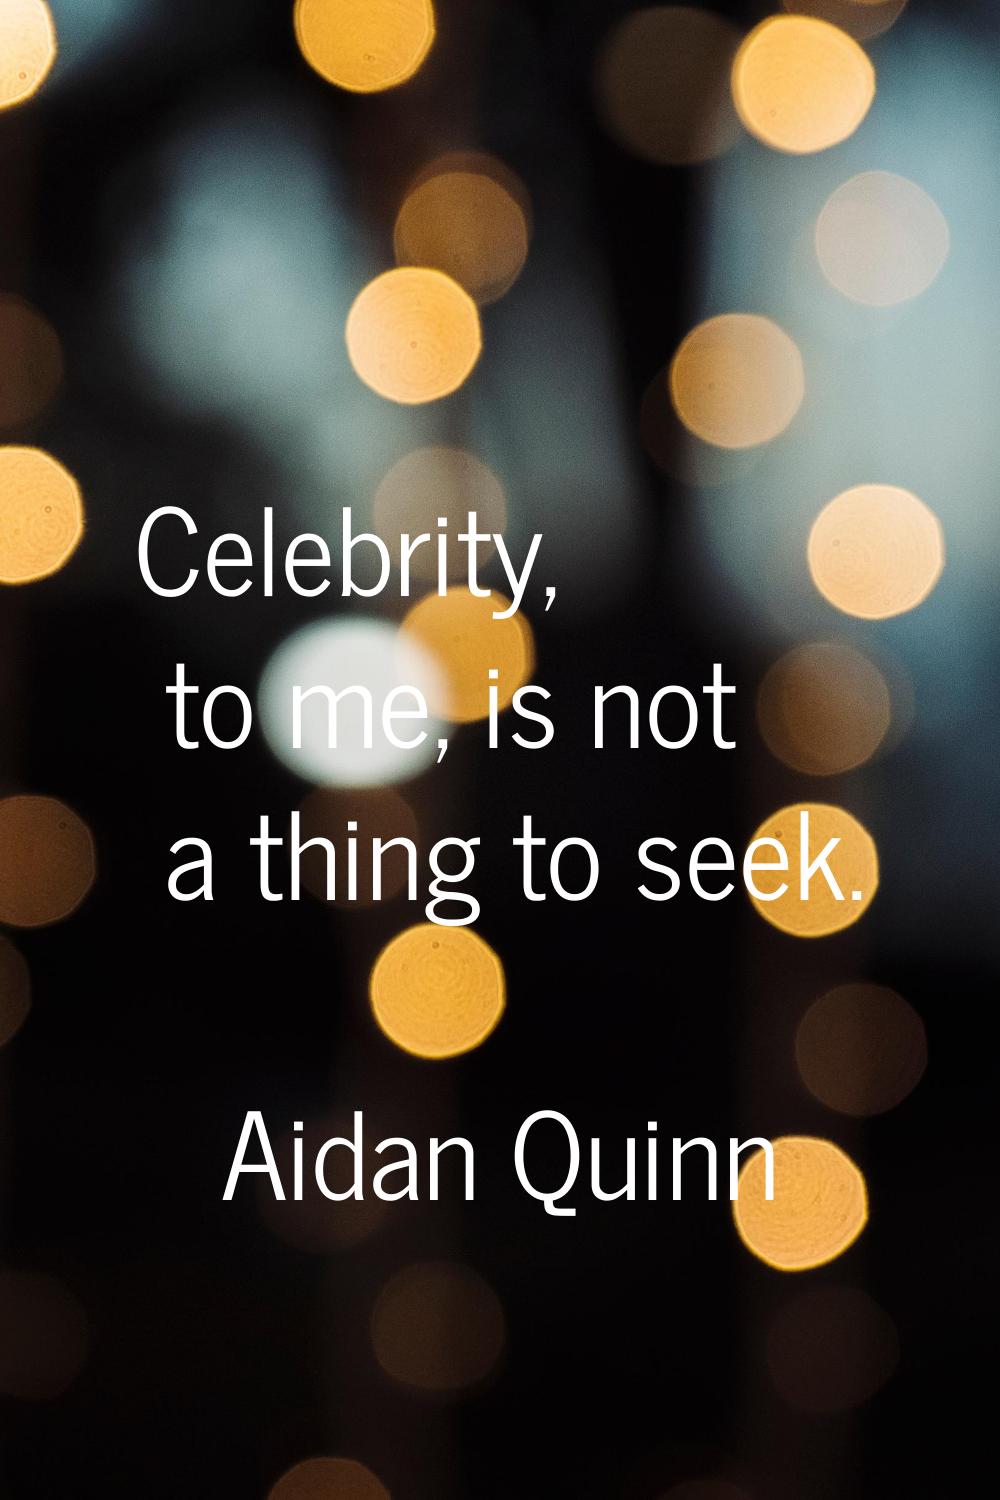 Celebrity, to me, is not a thing to seek.